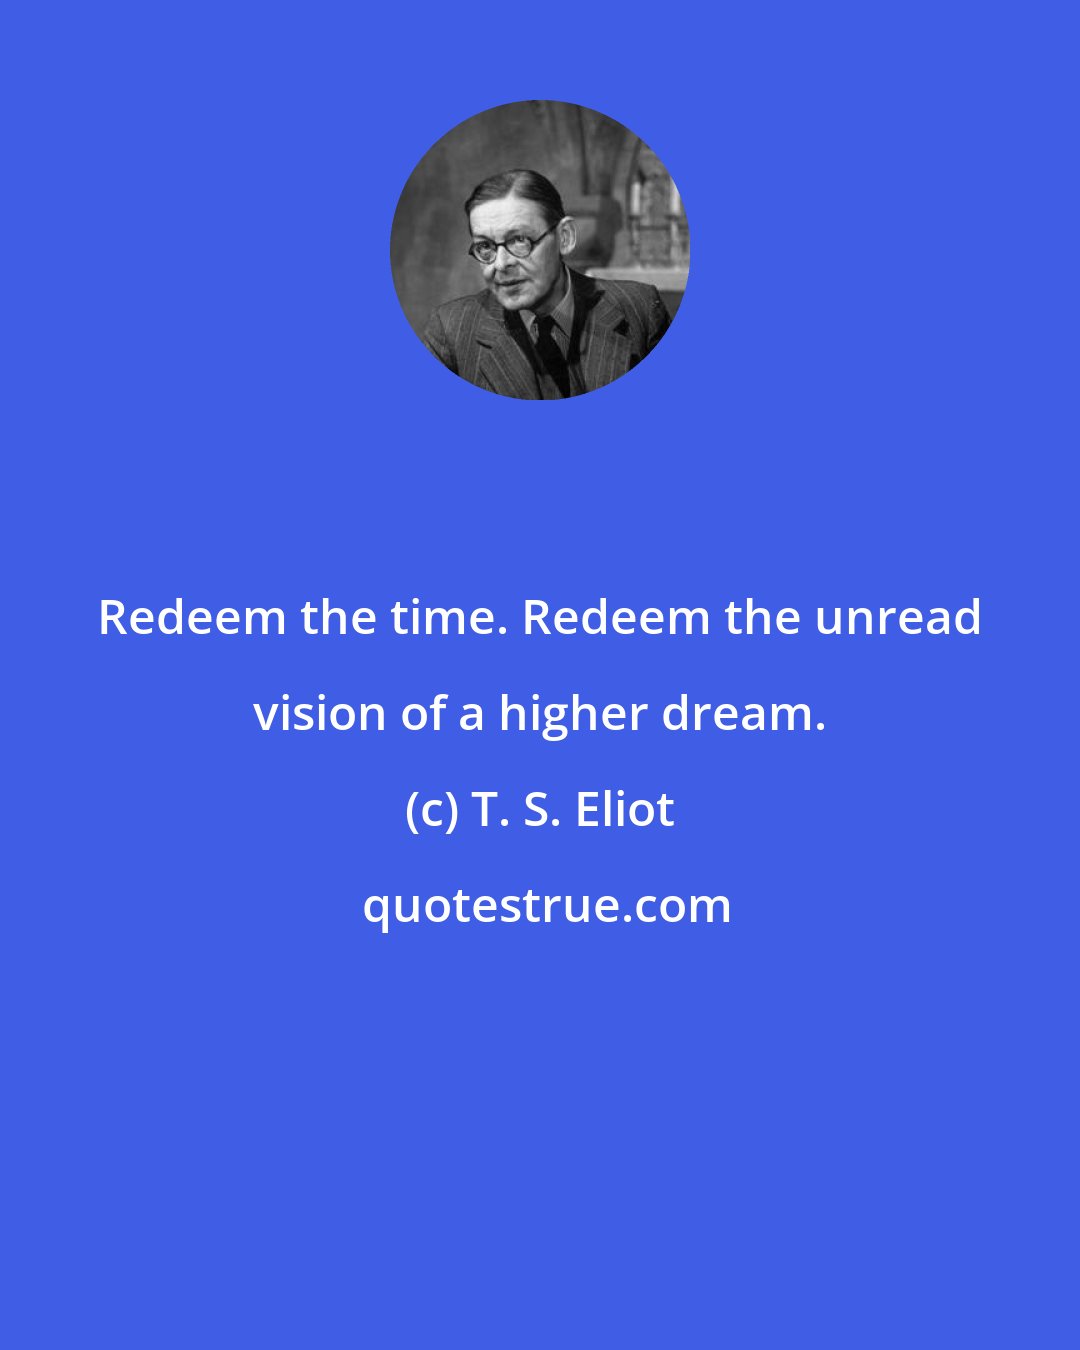 T. S. Eliot: Redeem the time. Redeem the unread vision of a higher dream.